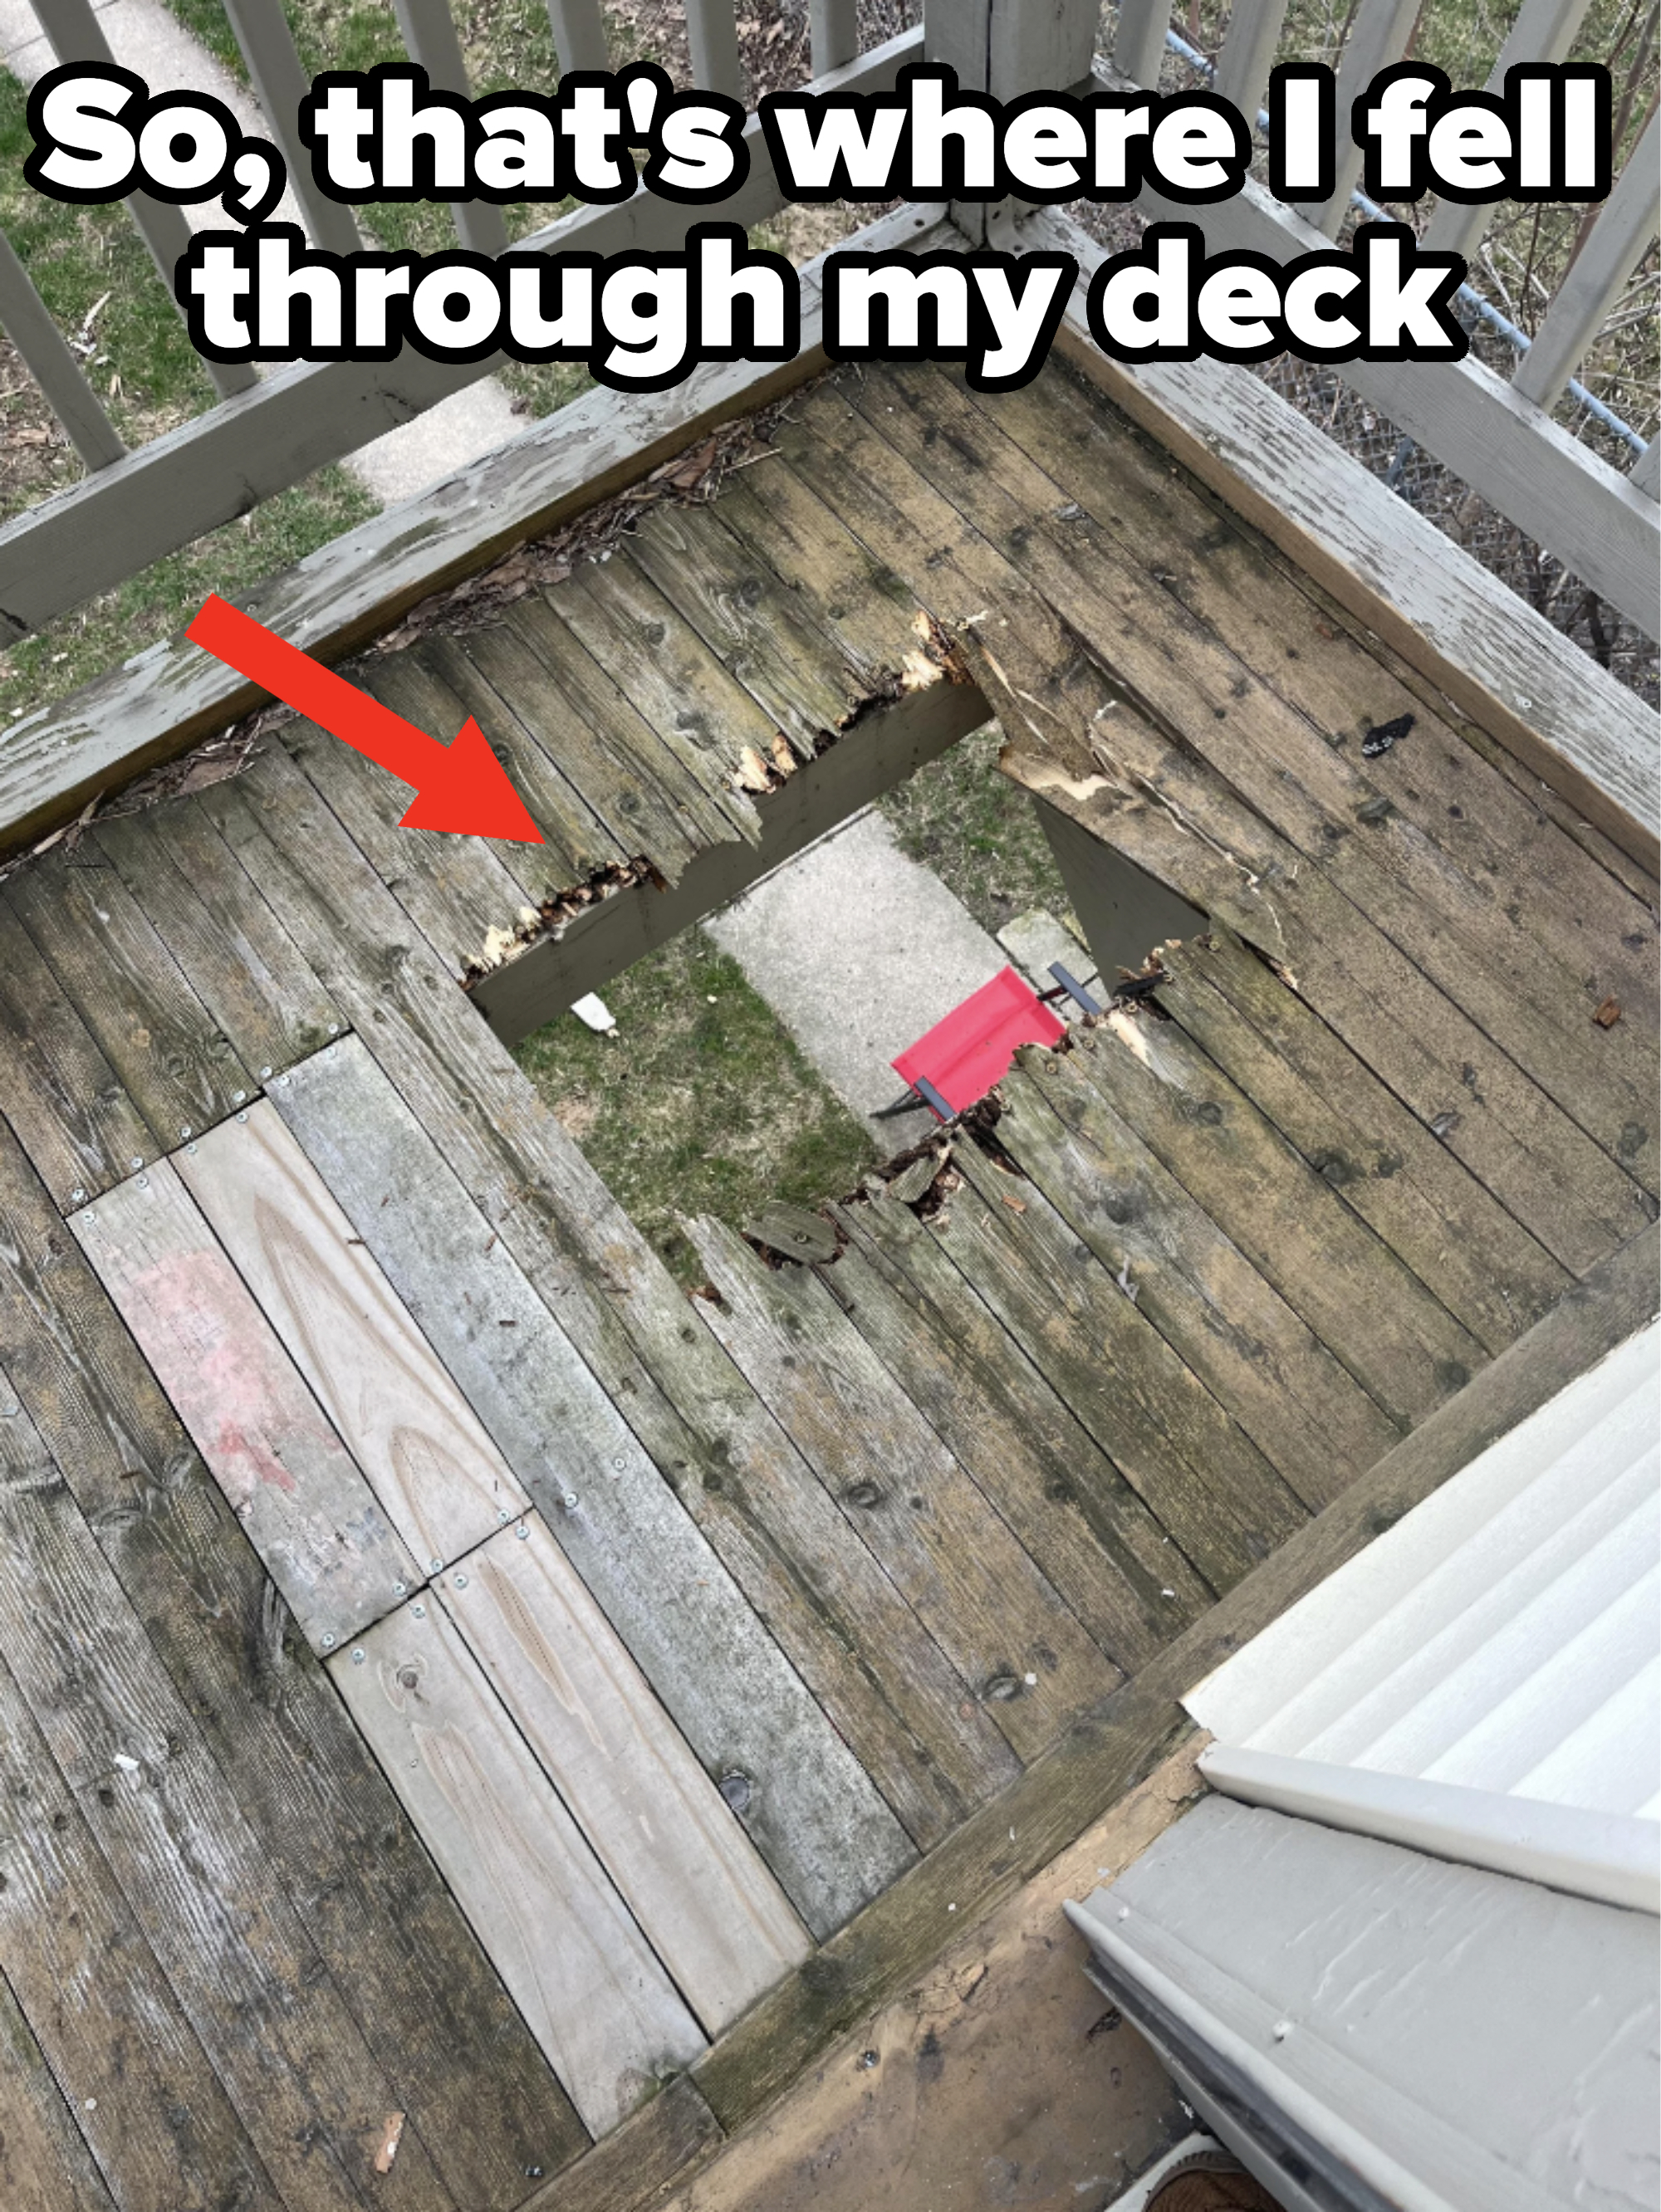 A damaged wooden deck with a sizable hole and a red chair visible below through the opening